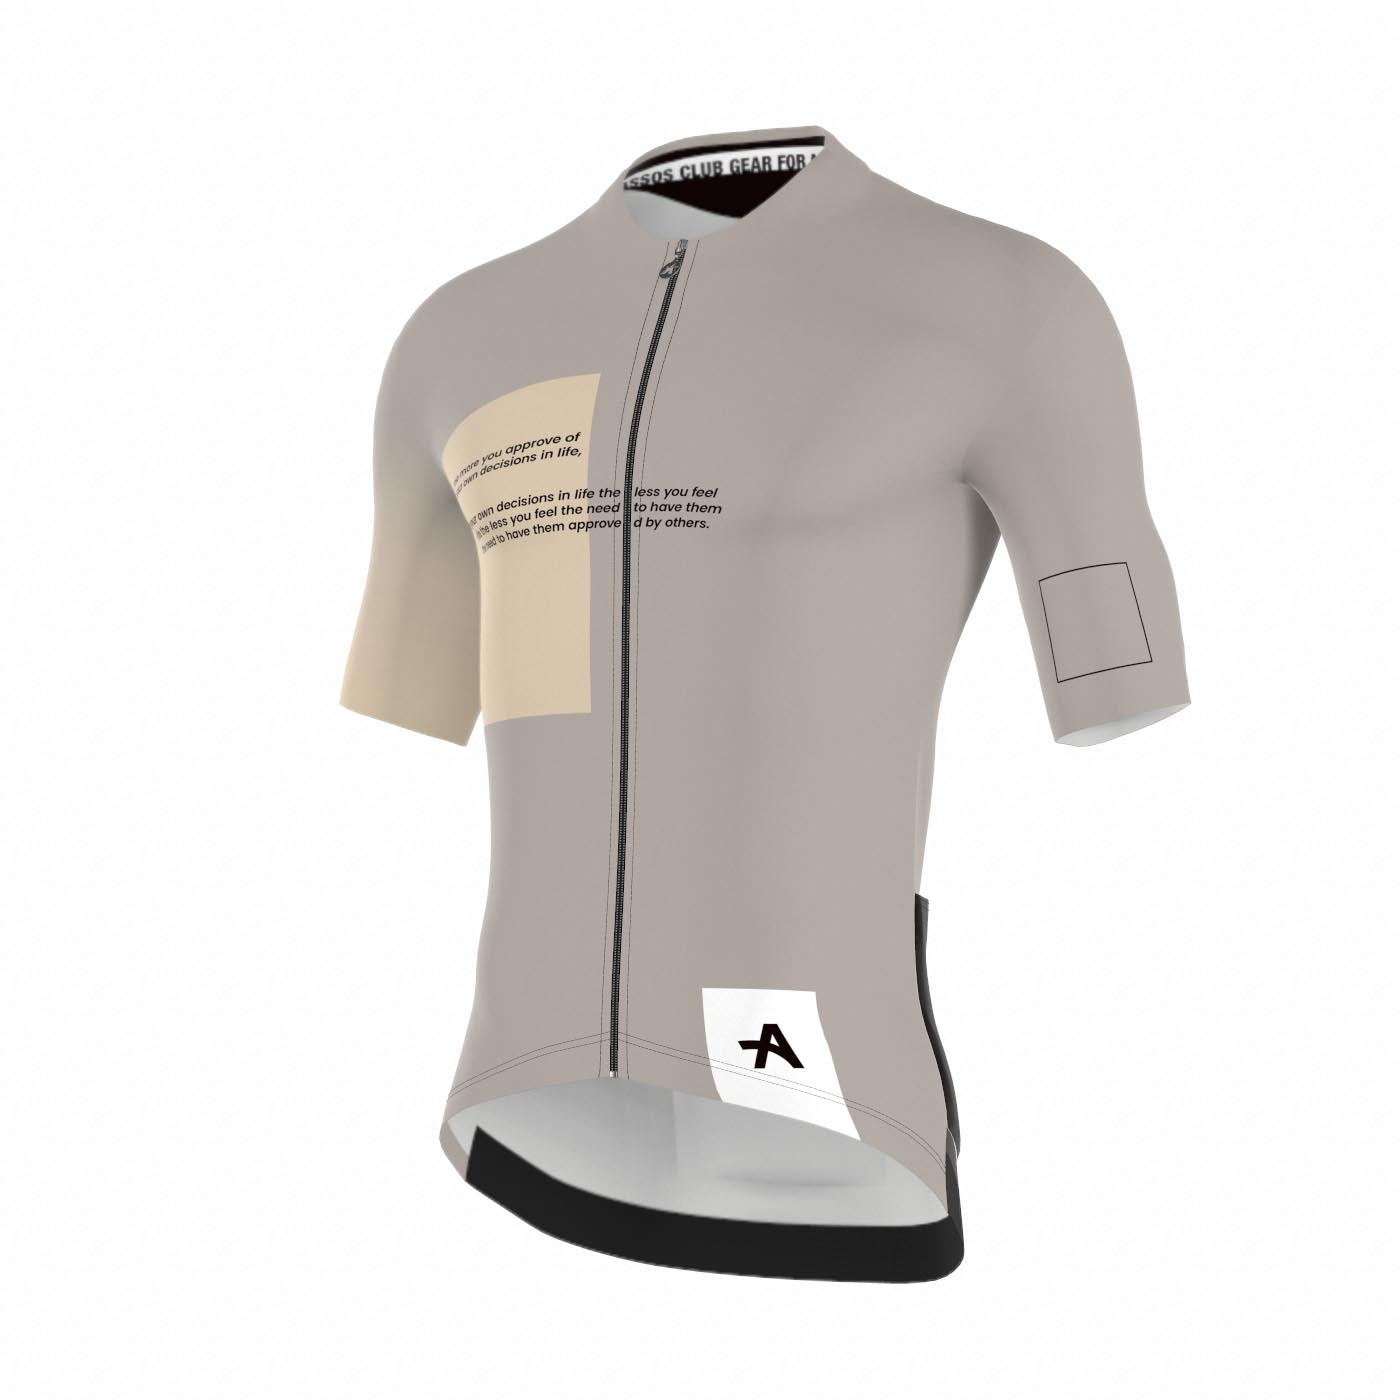 SUMMER CYCLING JERSEY APPROVED MINDSET UNISEX LTD.